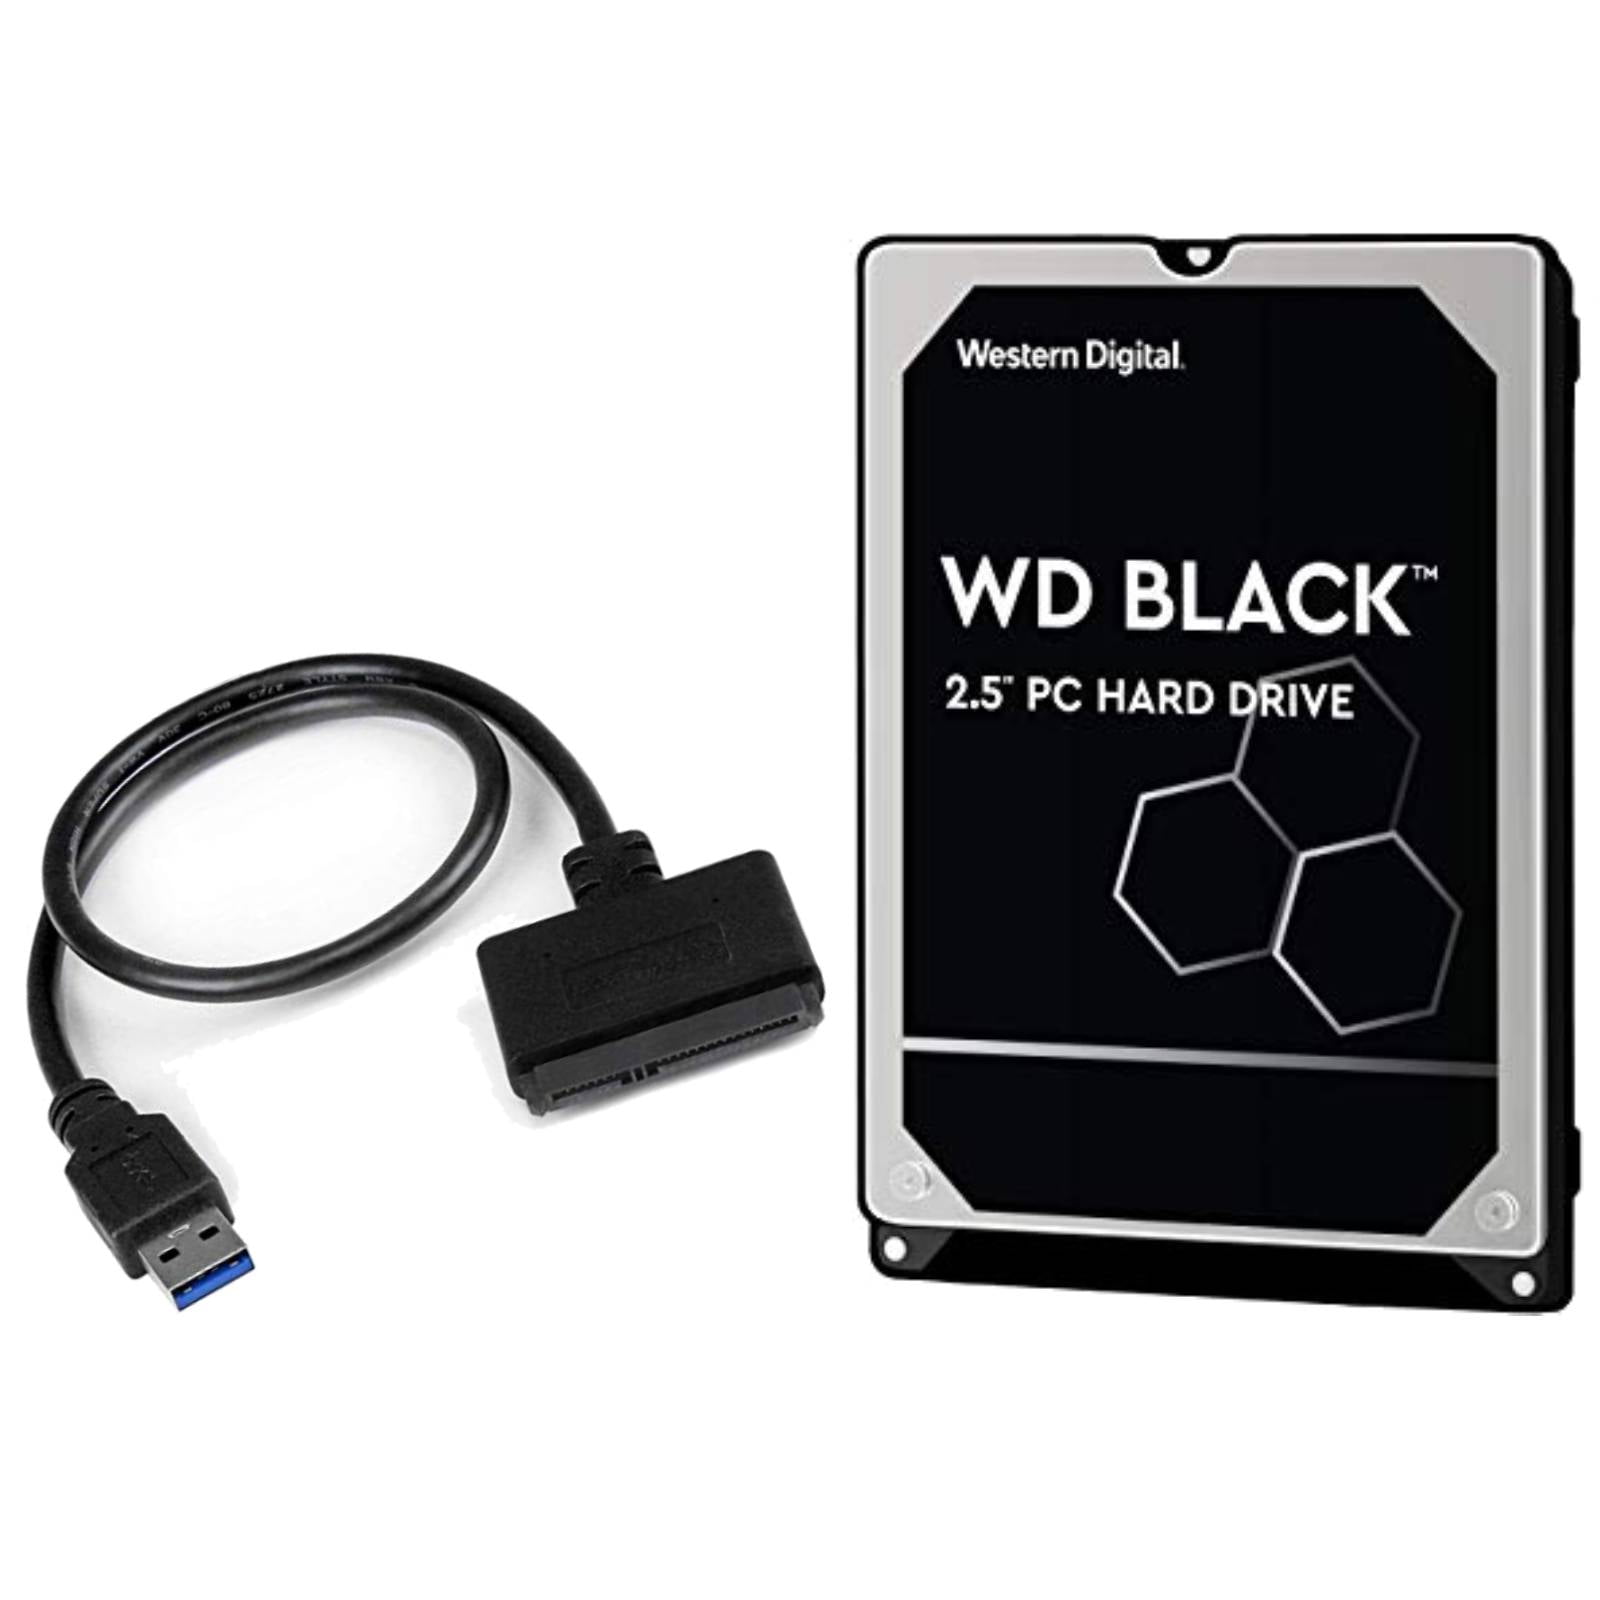 Promote it can itself WD 250GB WD Black Mobile OEM Hard Drive + StarTech USB 3.0 to 2.5" Adapter  Cable - Walmart.com